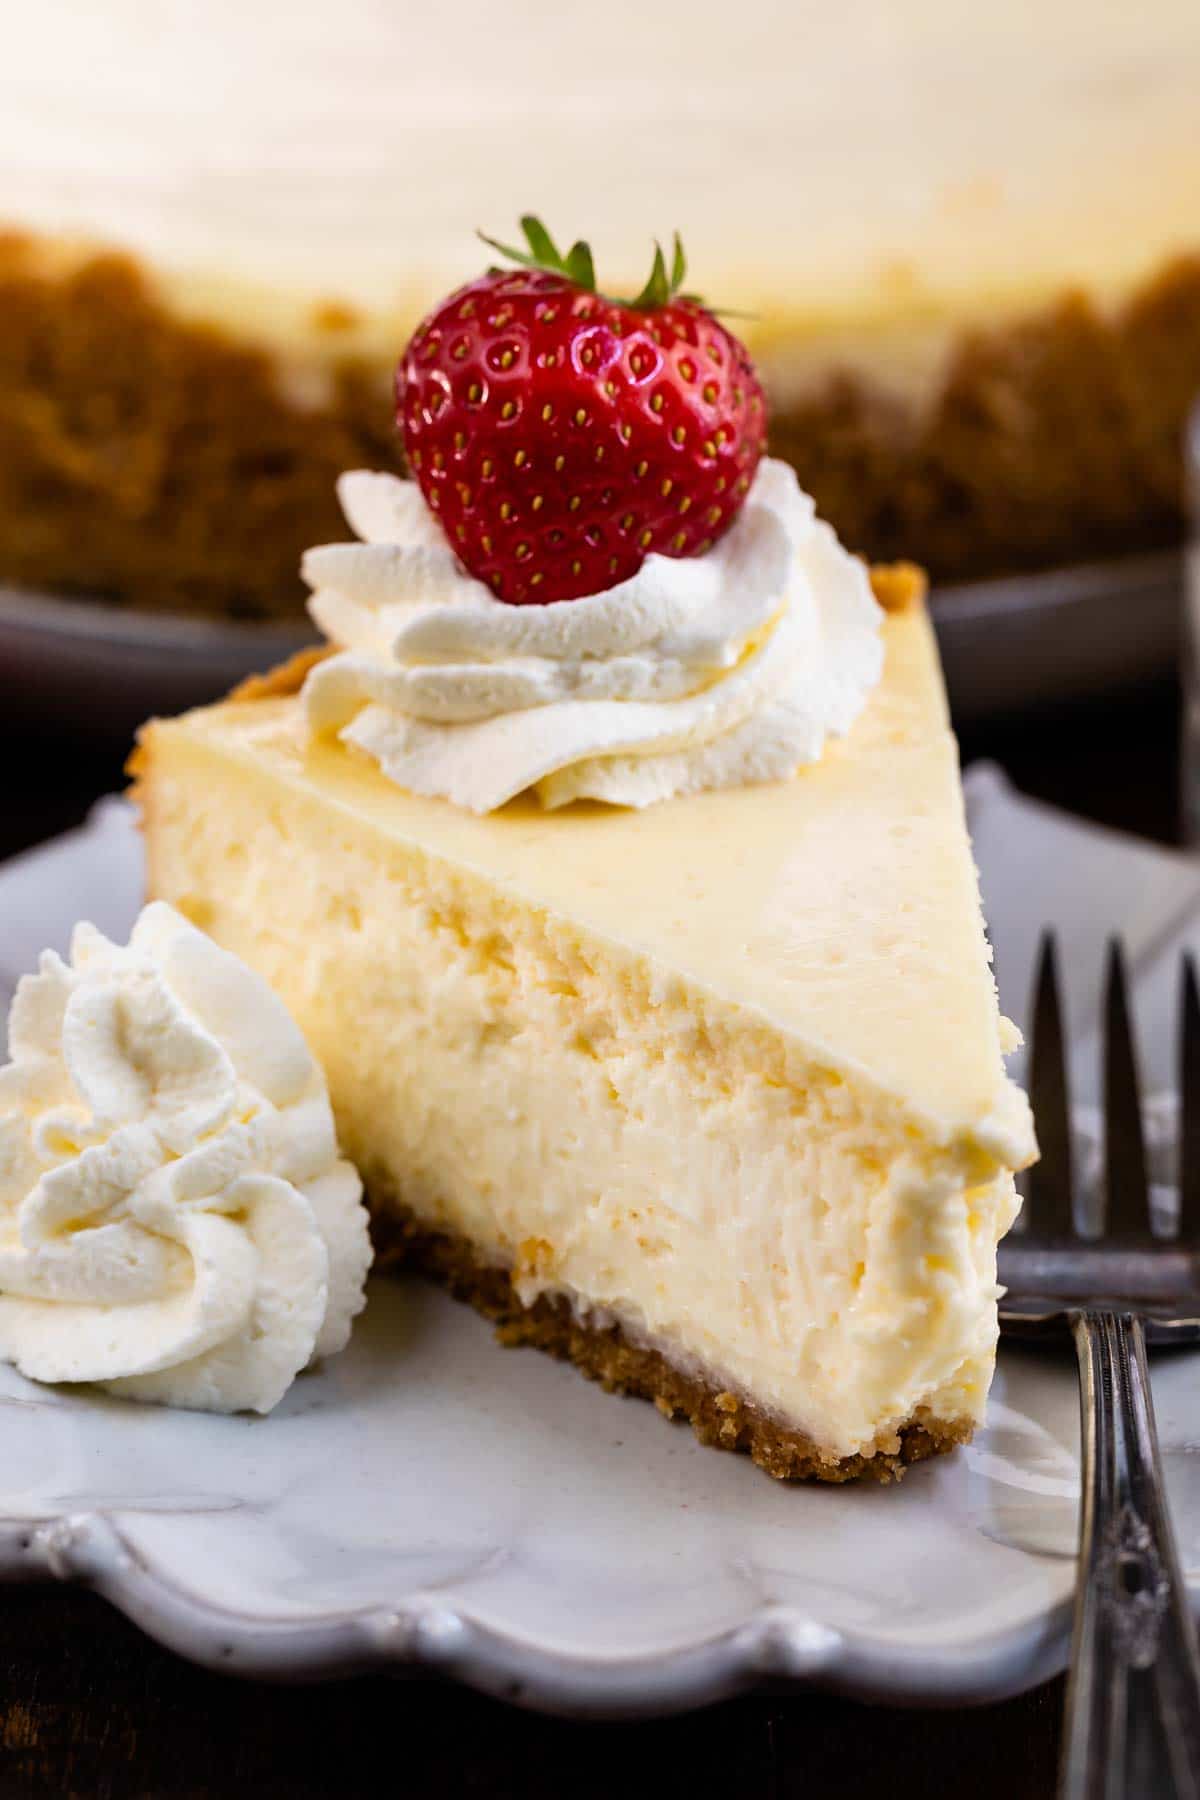 A slice of classic cheesecake on a plate with whipped cream and a strawberry on top